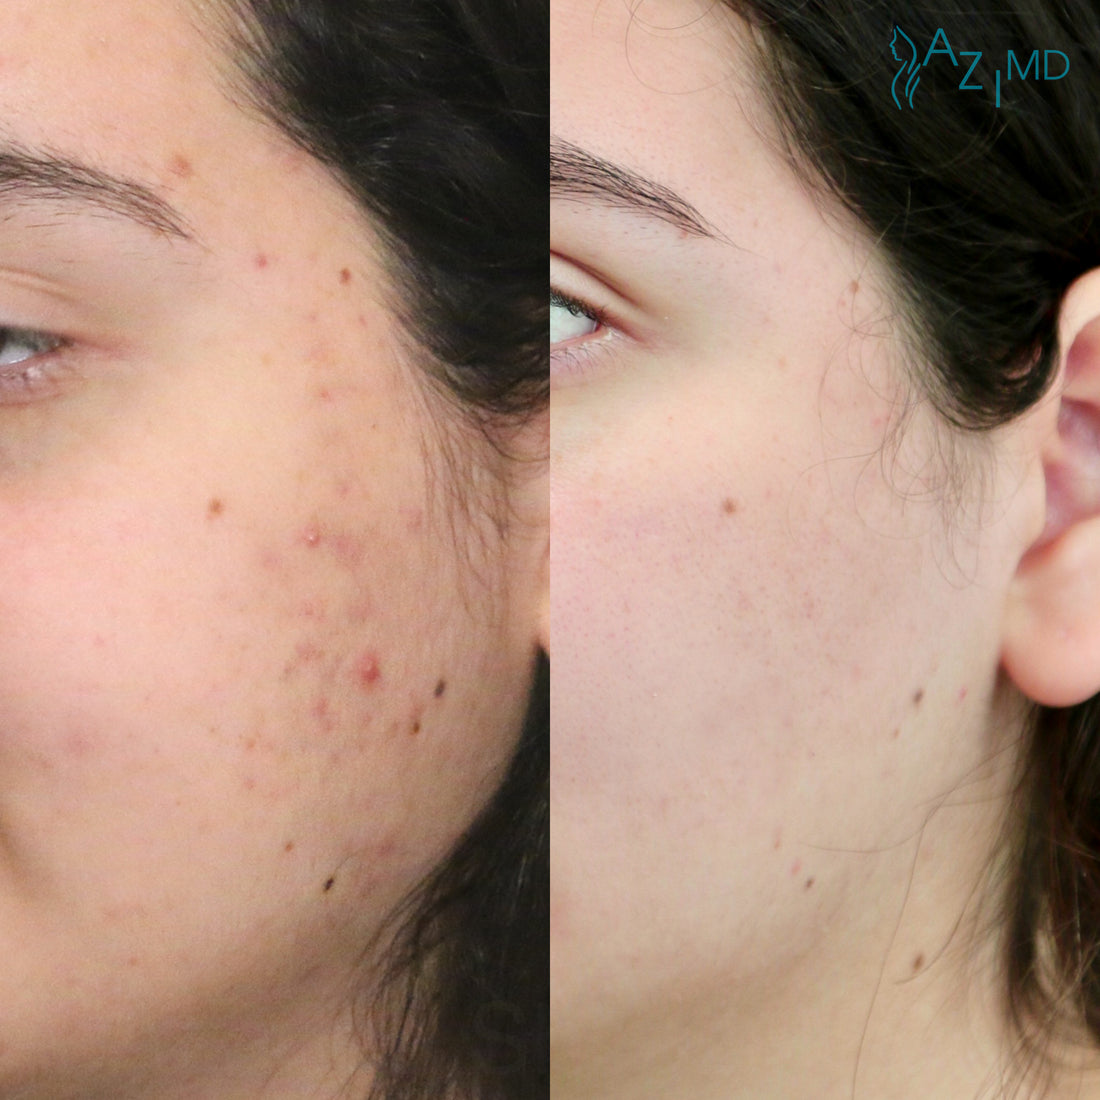 Woman's Cheek Before and After Using Foaming Facial Cleanser